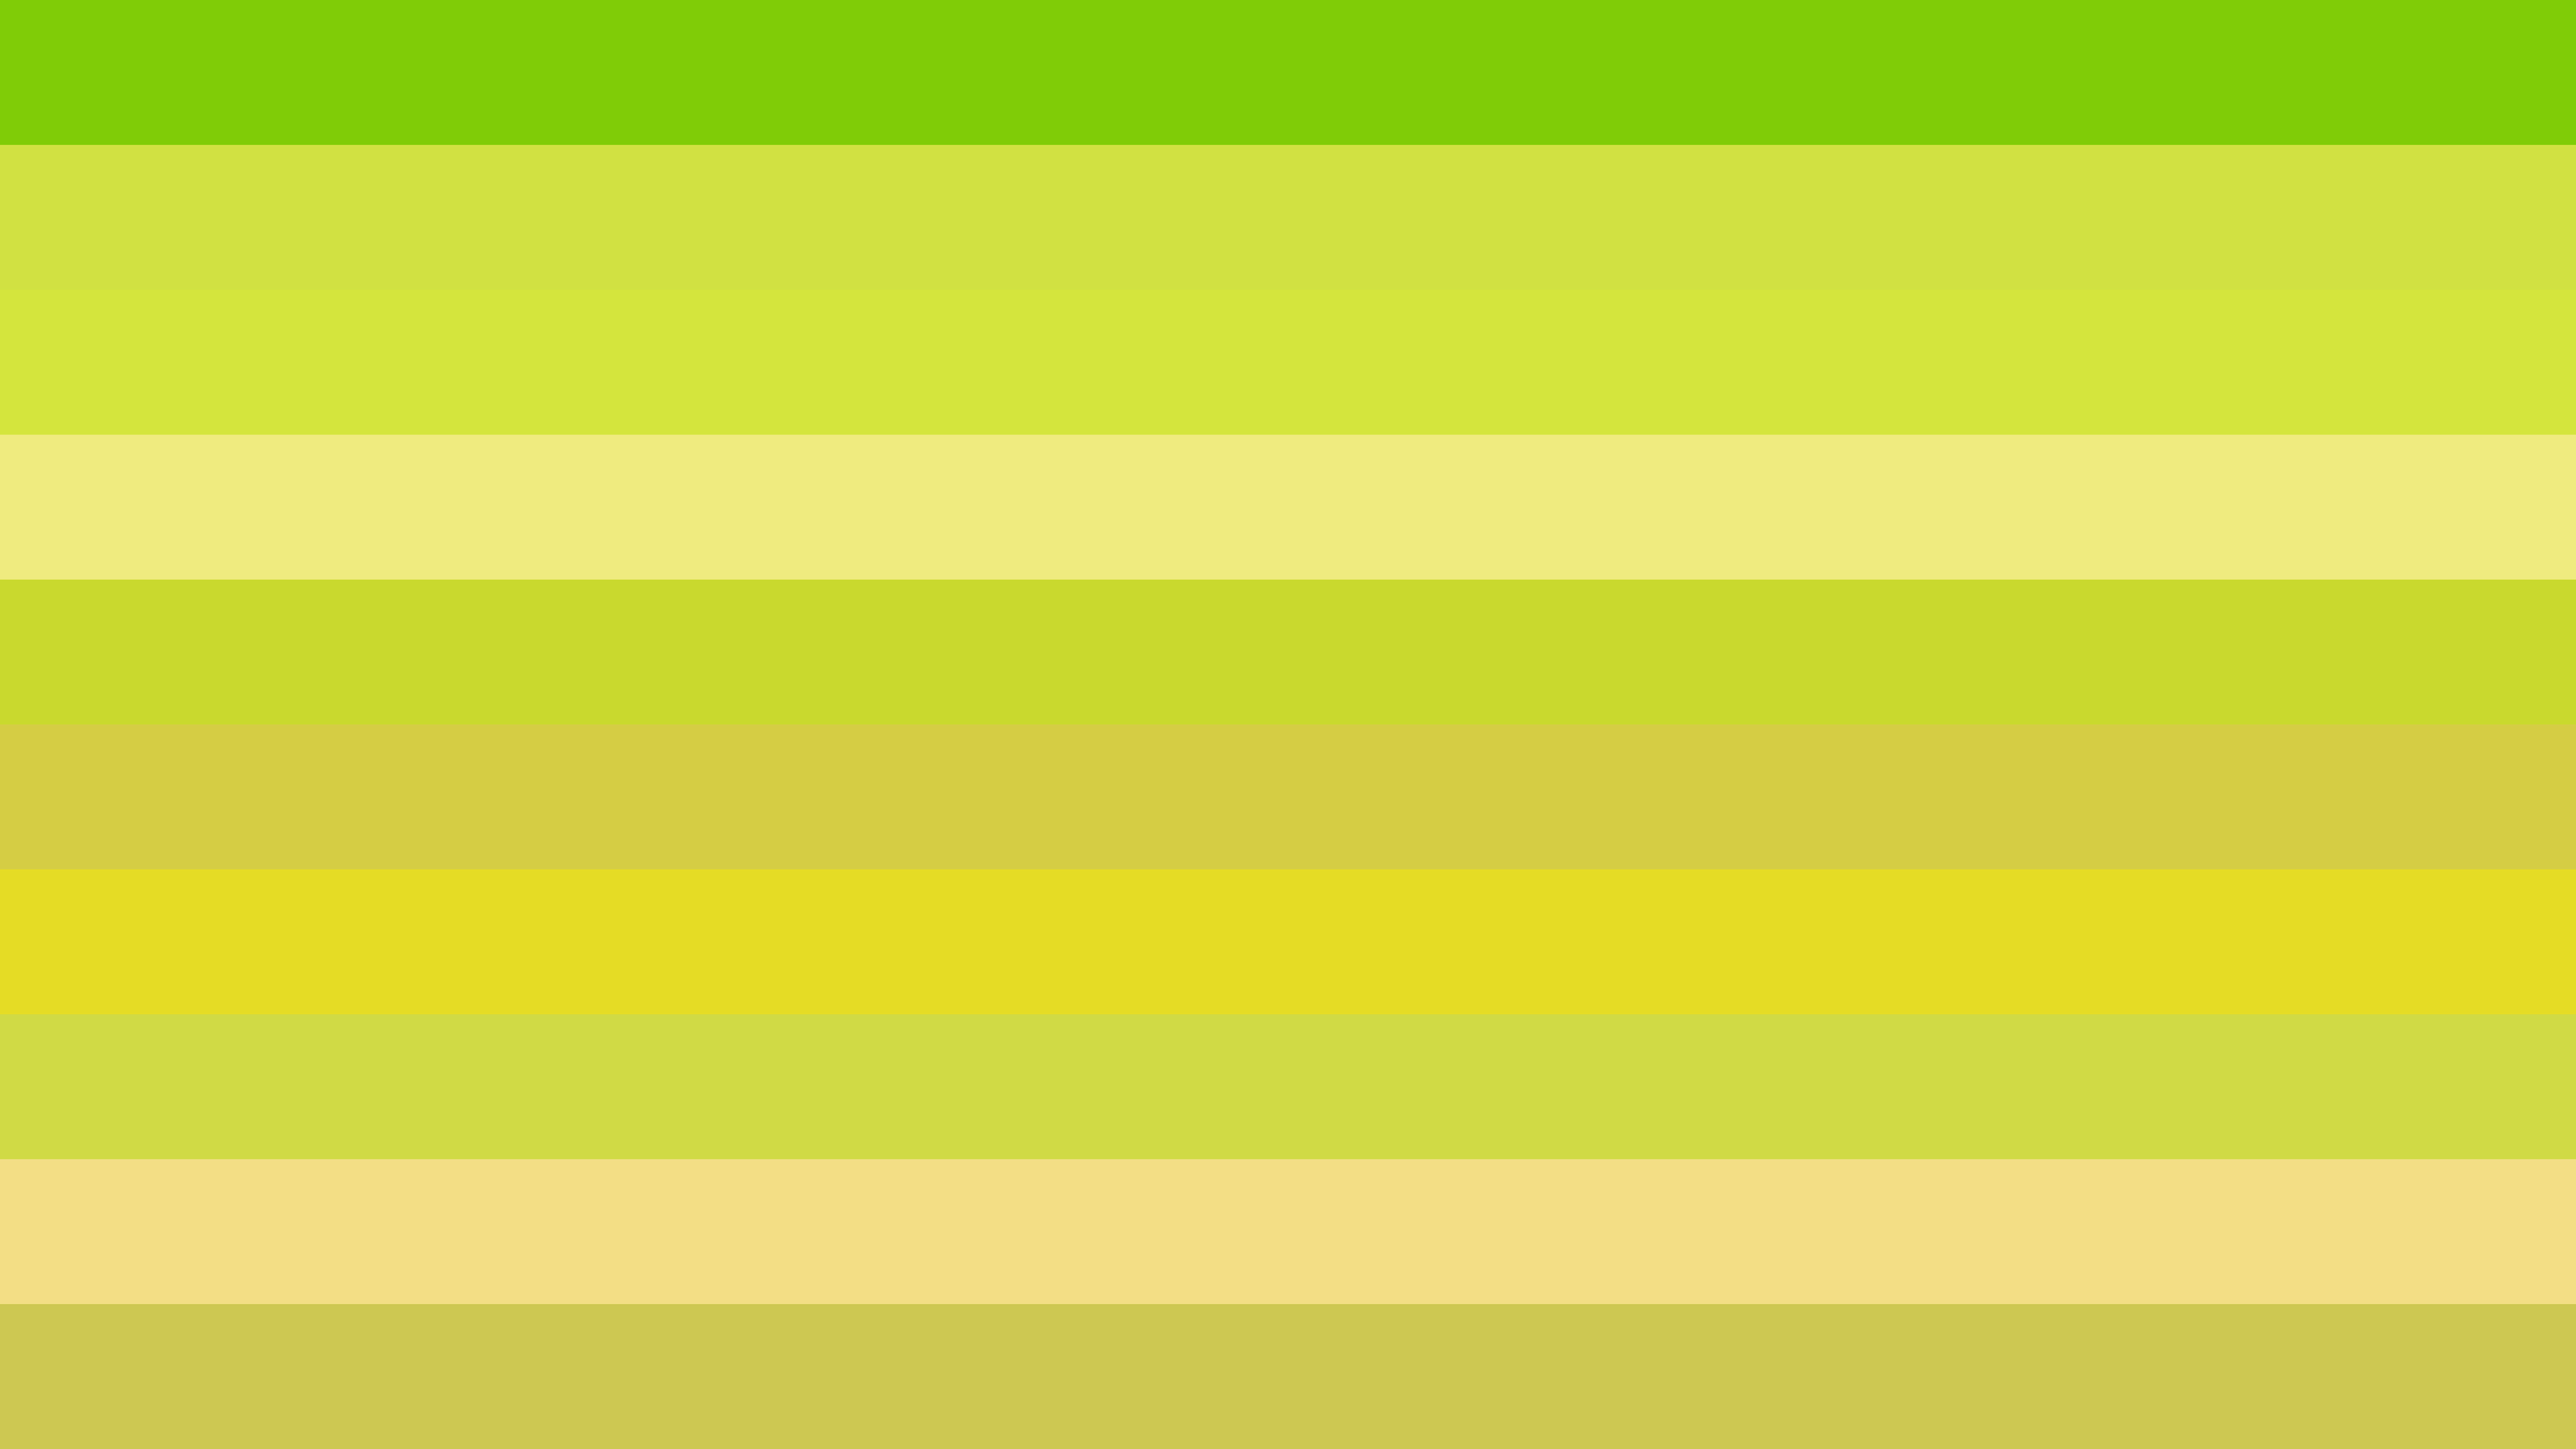 Free Green and Yellow Stripes Background Vector